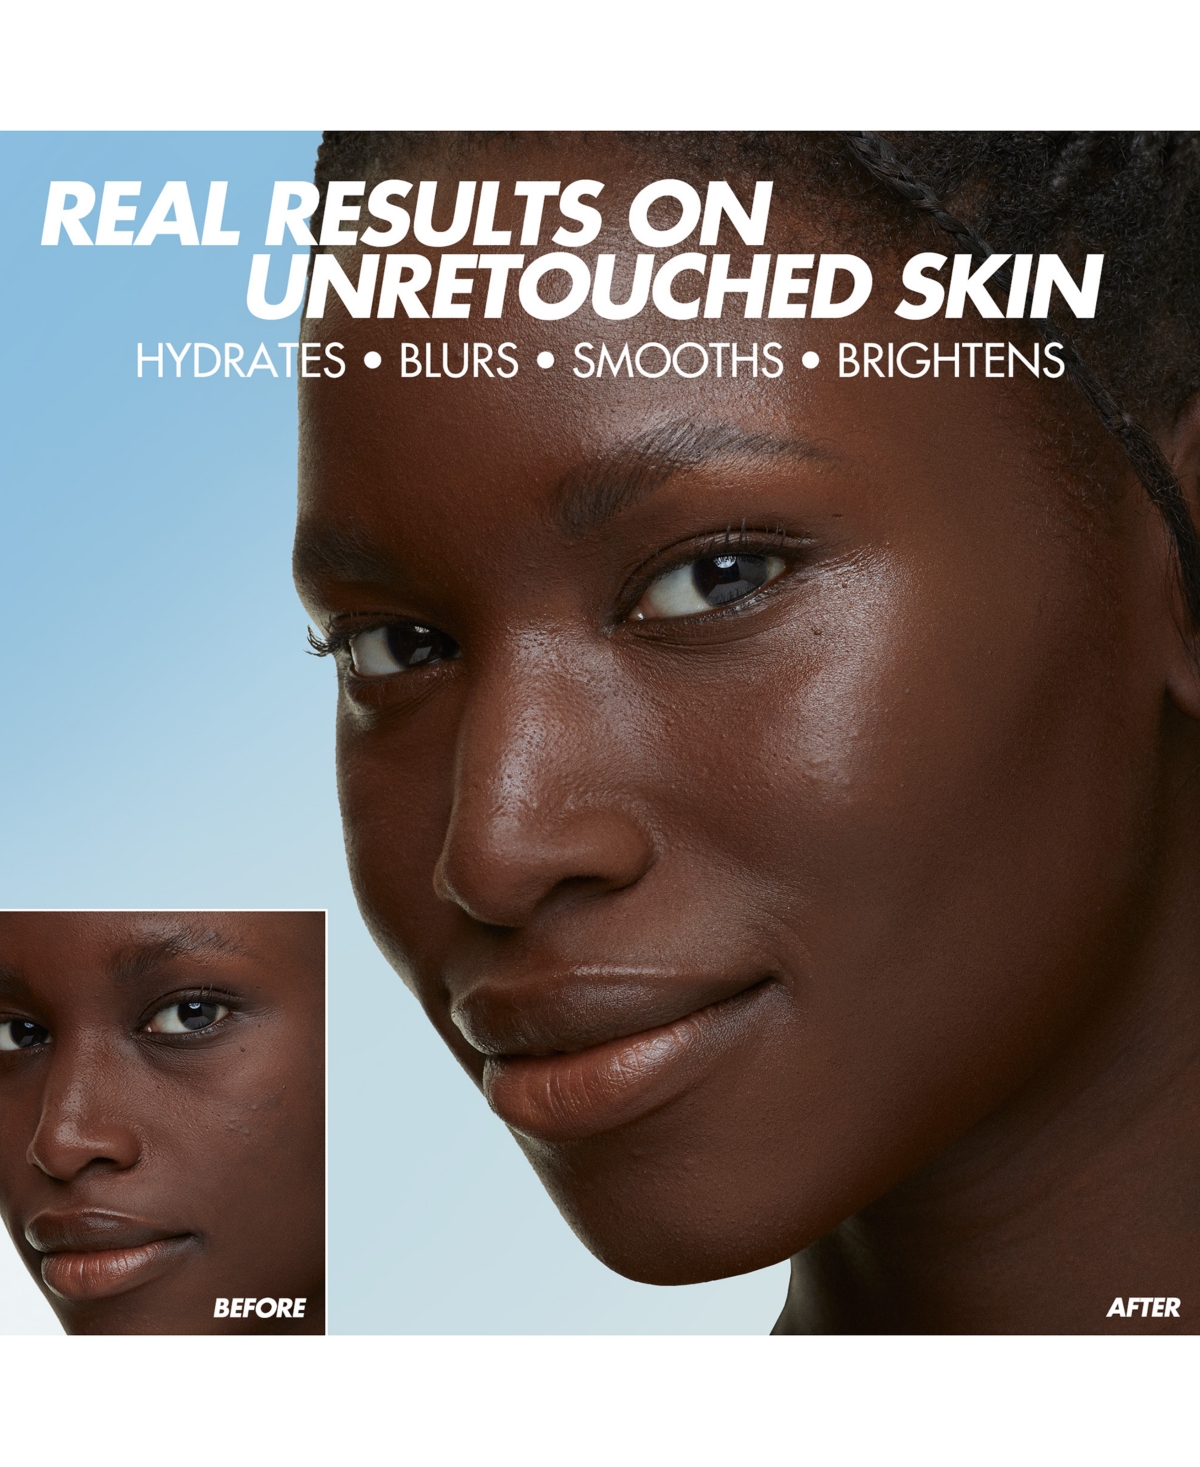 Shop Make Up For Ever Hd Skin Hydra Glow Skincare Foundation With Hyaluronic Acid In N - Almondâ - For Deep Skin With Neutra